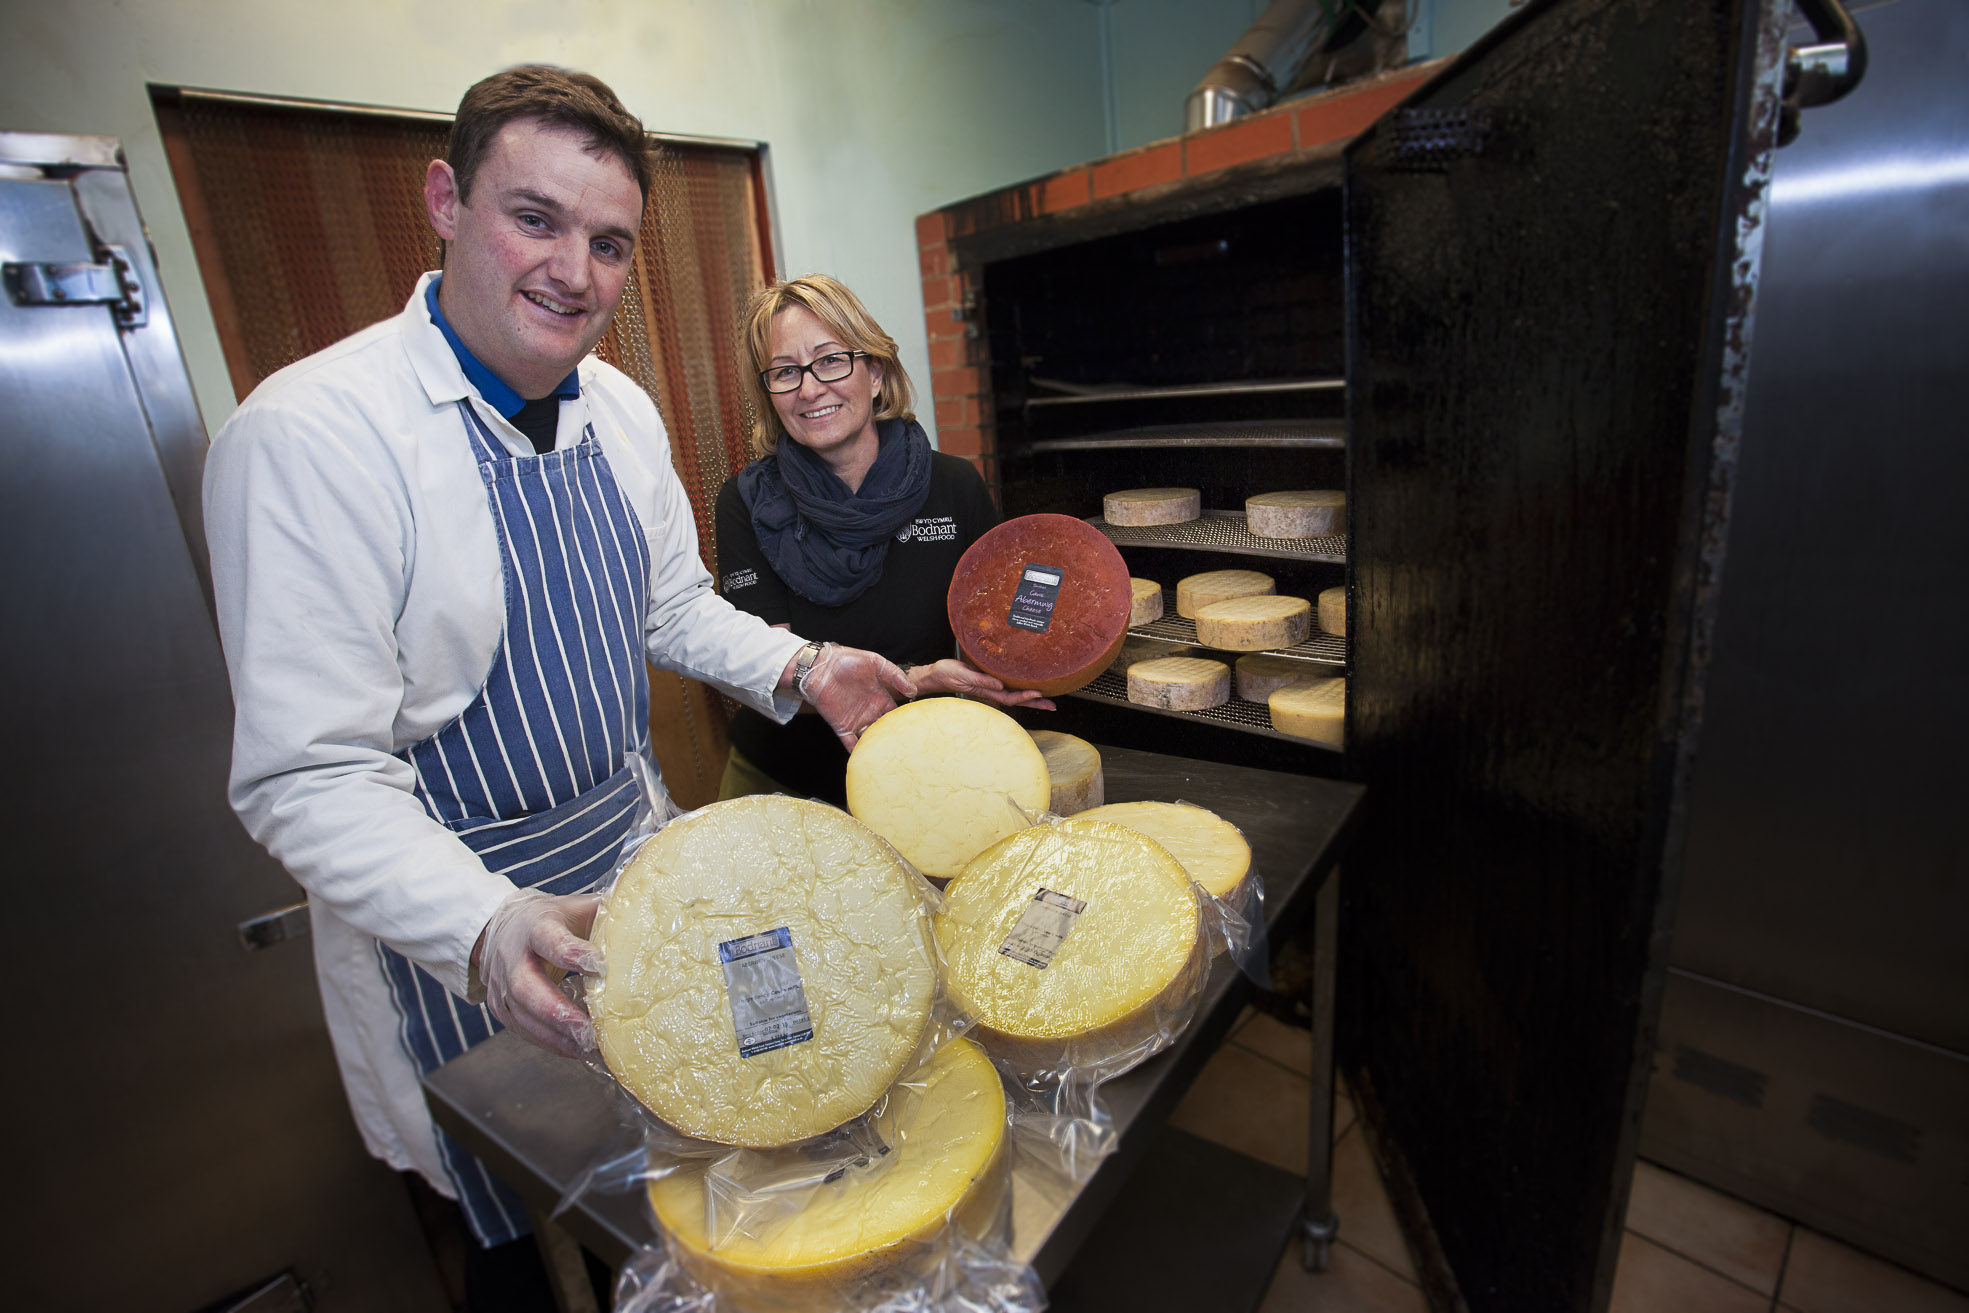 New smoked cheese from Bodnant Welsh Food Centre ready for nationwide roll-out